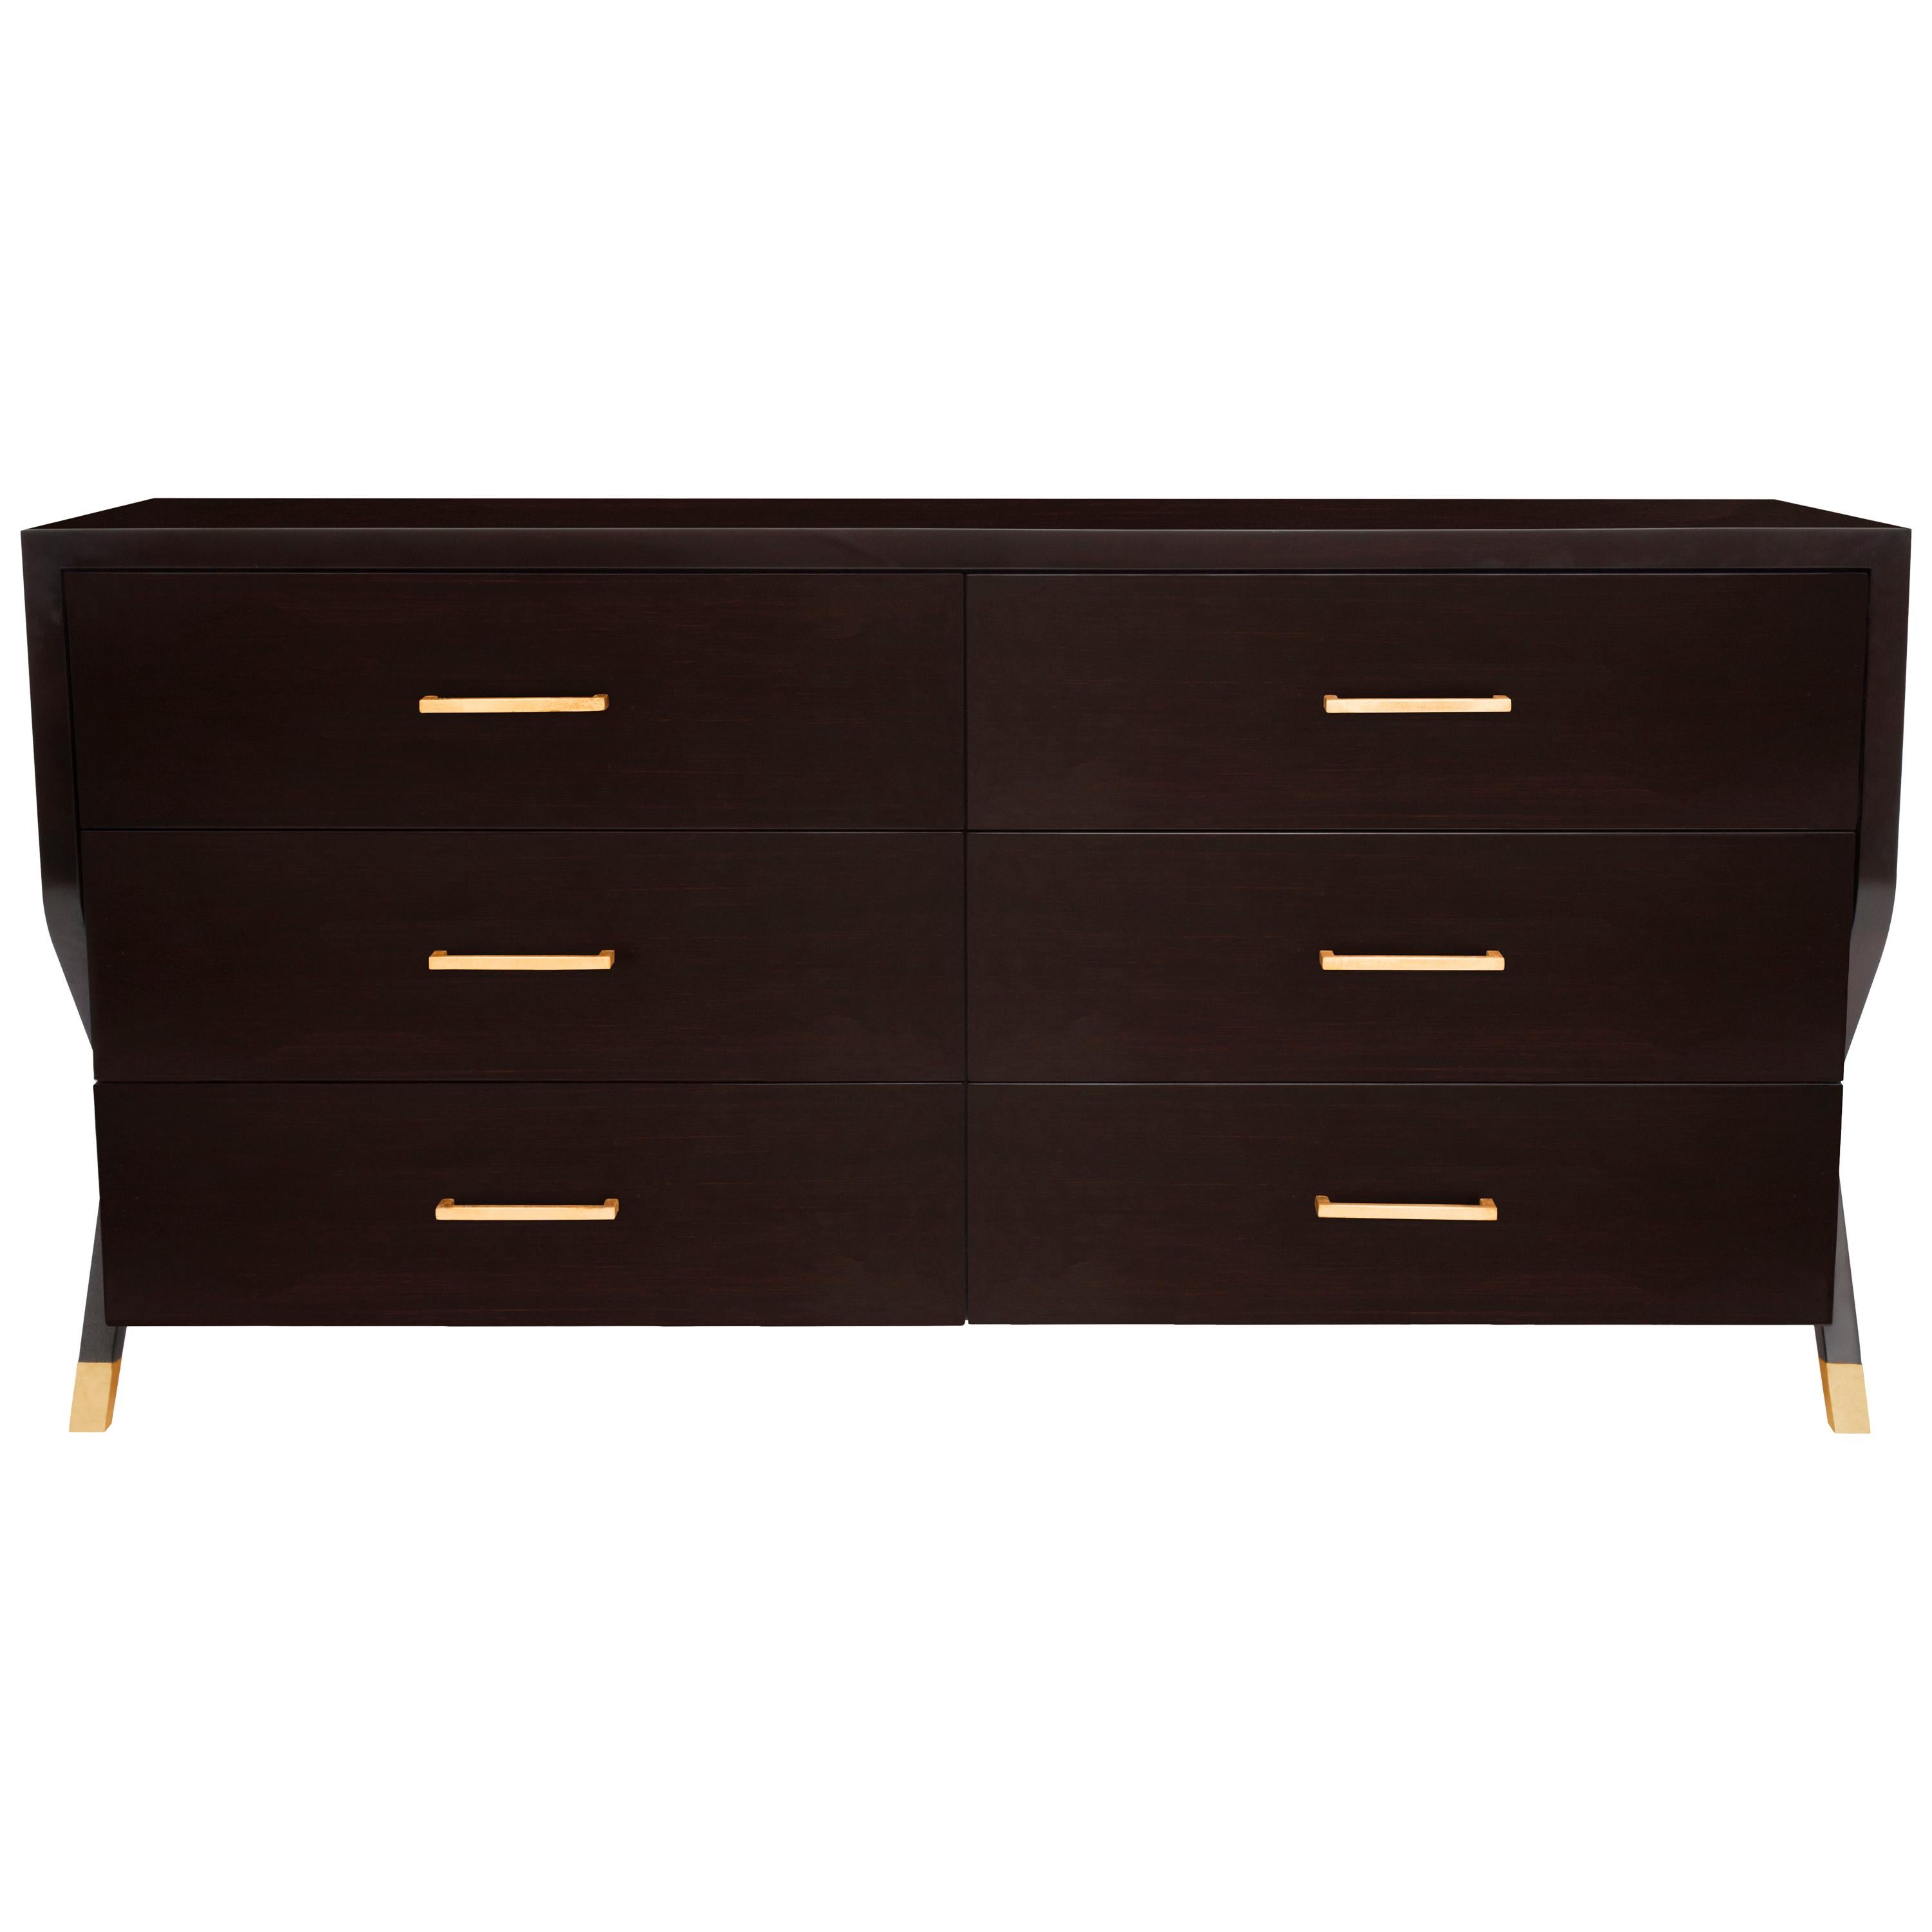 Catalina Dresser in Chocolate and Gold by Innova Luxuxy Group For Sale